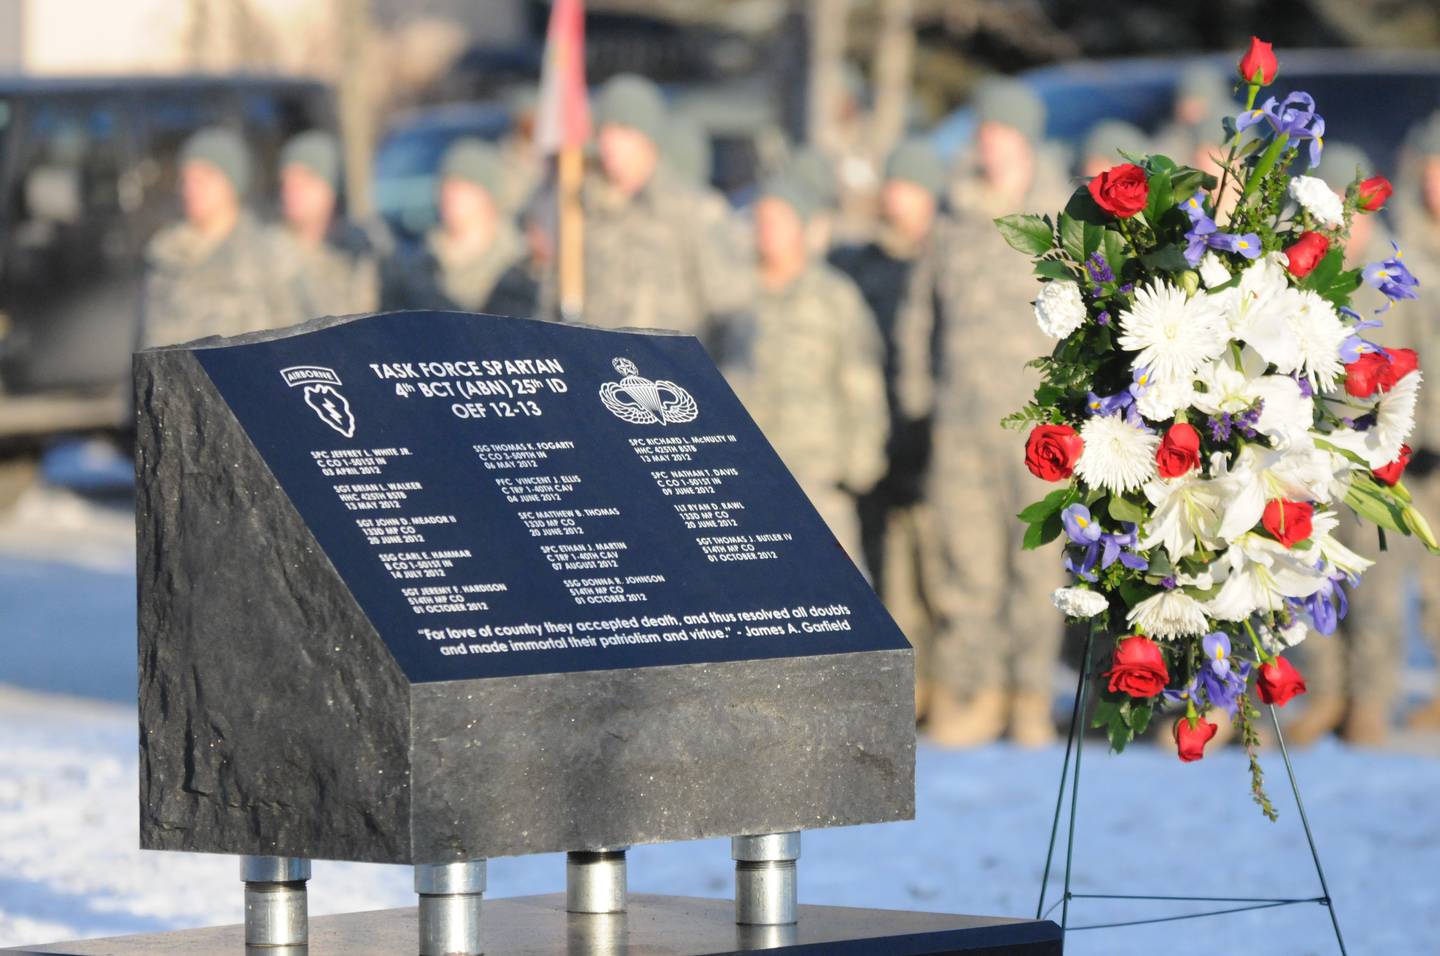 The memorial monument at Joint Base Elmendorf-Richardson, Alaska, honoring the paratroopers of the Spartan Brigade is unveiled on Nov. 16, 2012.